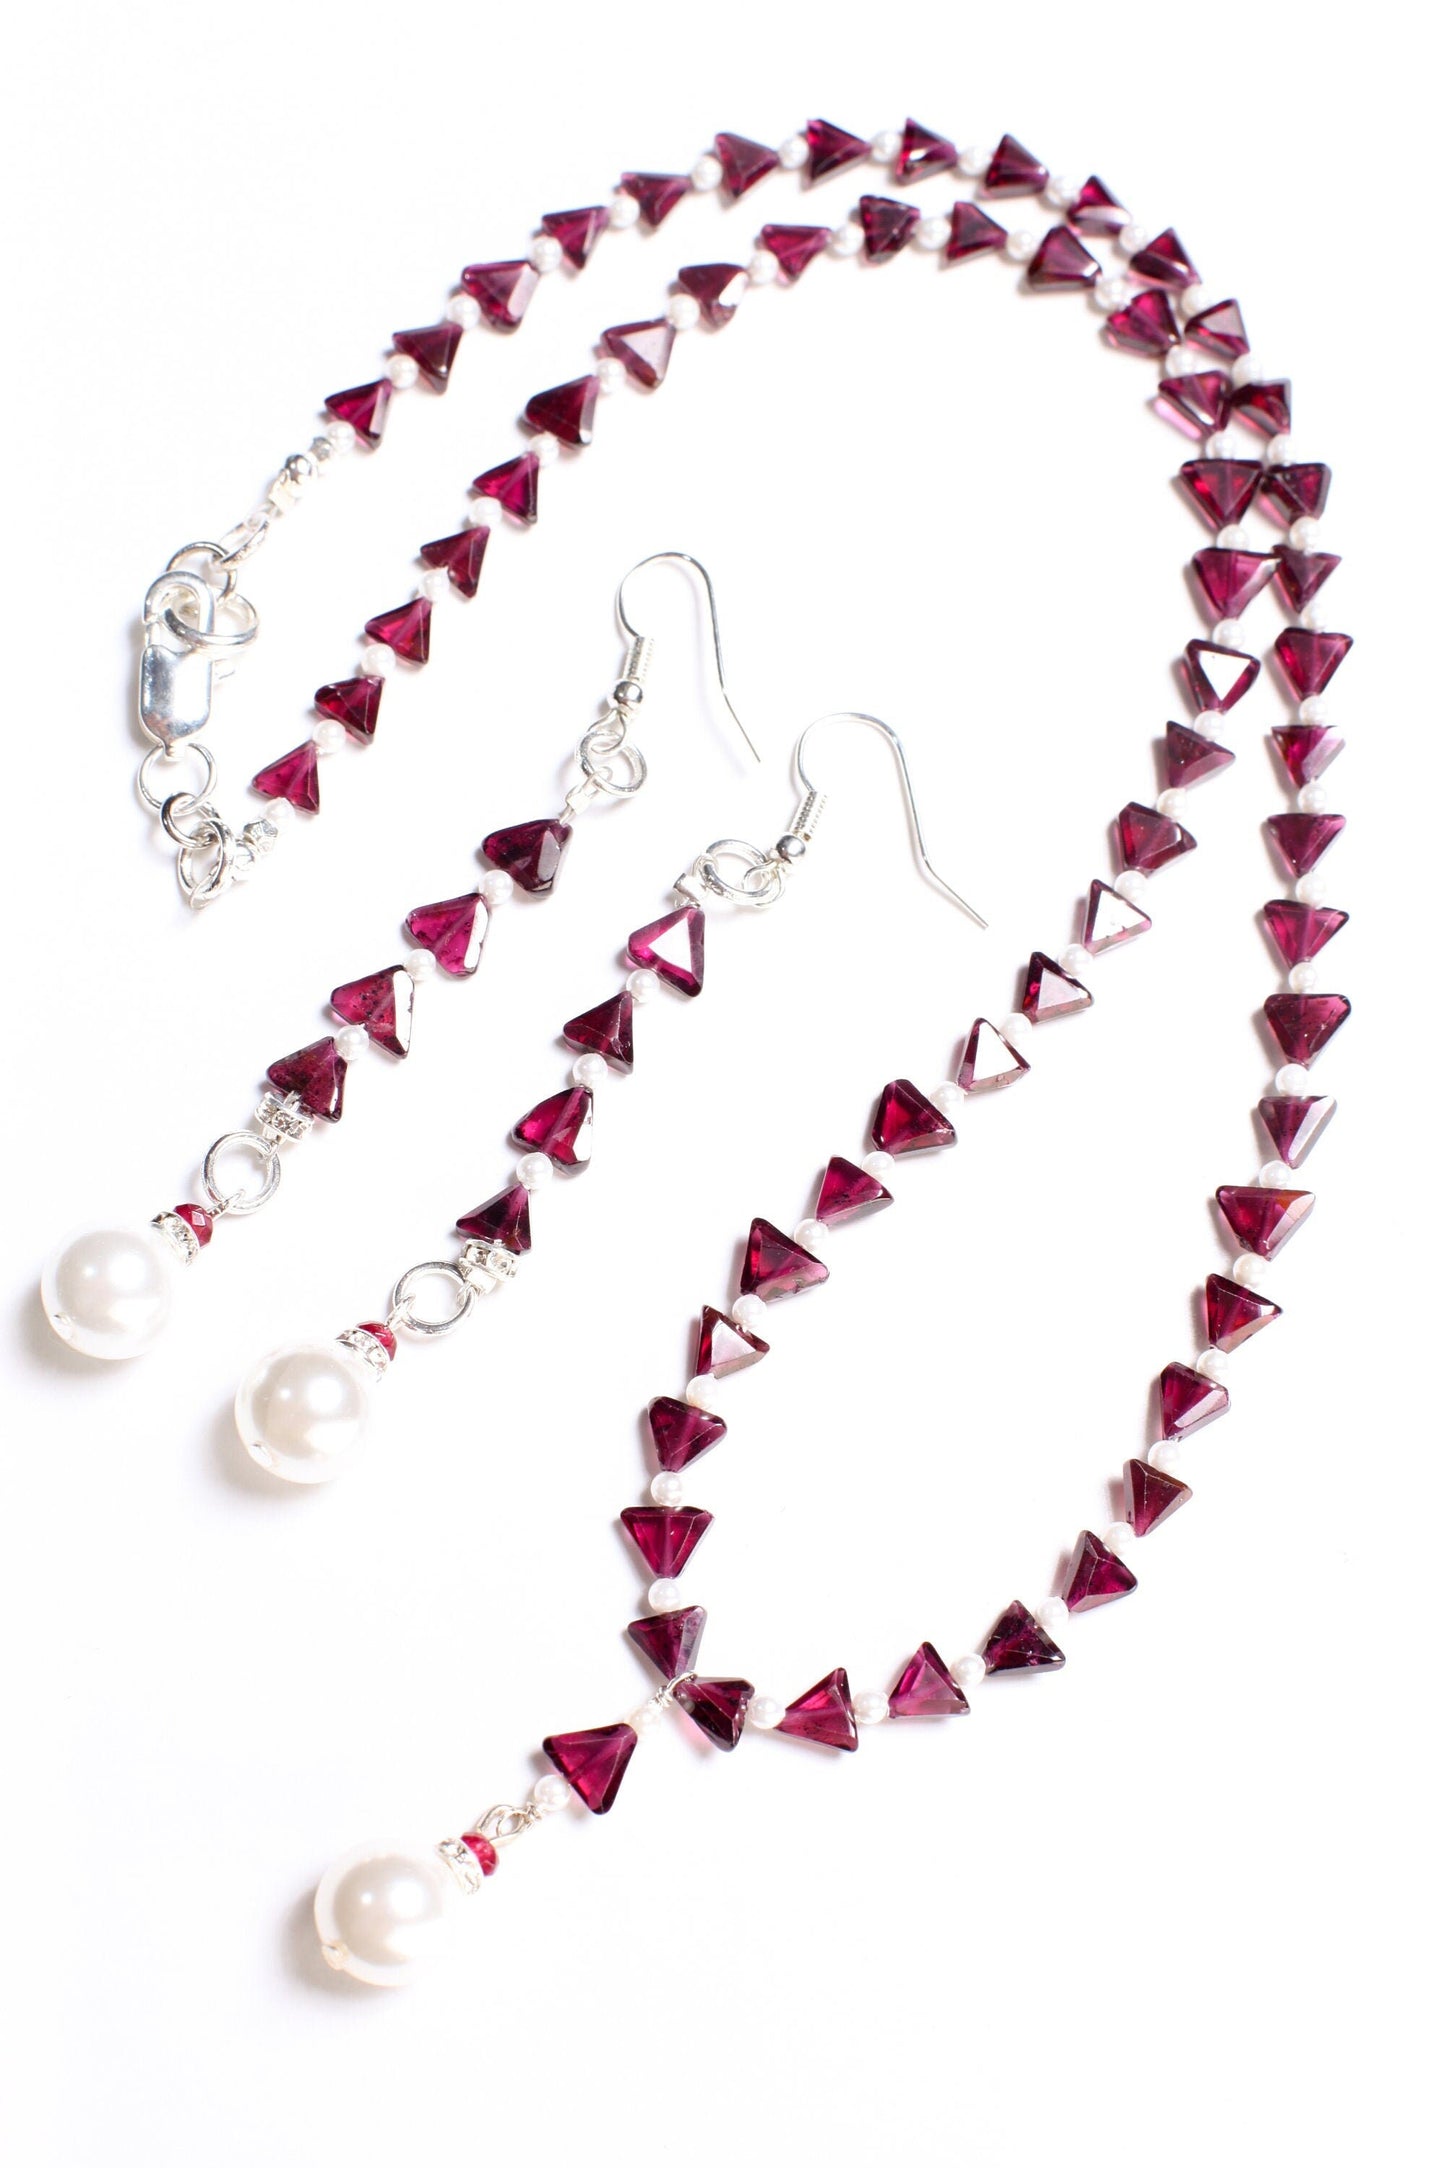 Genuine Garnet triangle shape with 2.5mm Freshwater Pearl Spacers Necklace and Matching Shell Pearl Dangling Earrings Jewelry Set.